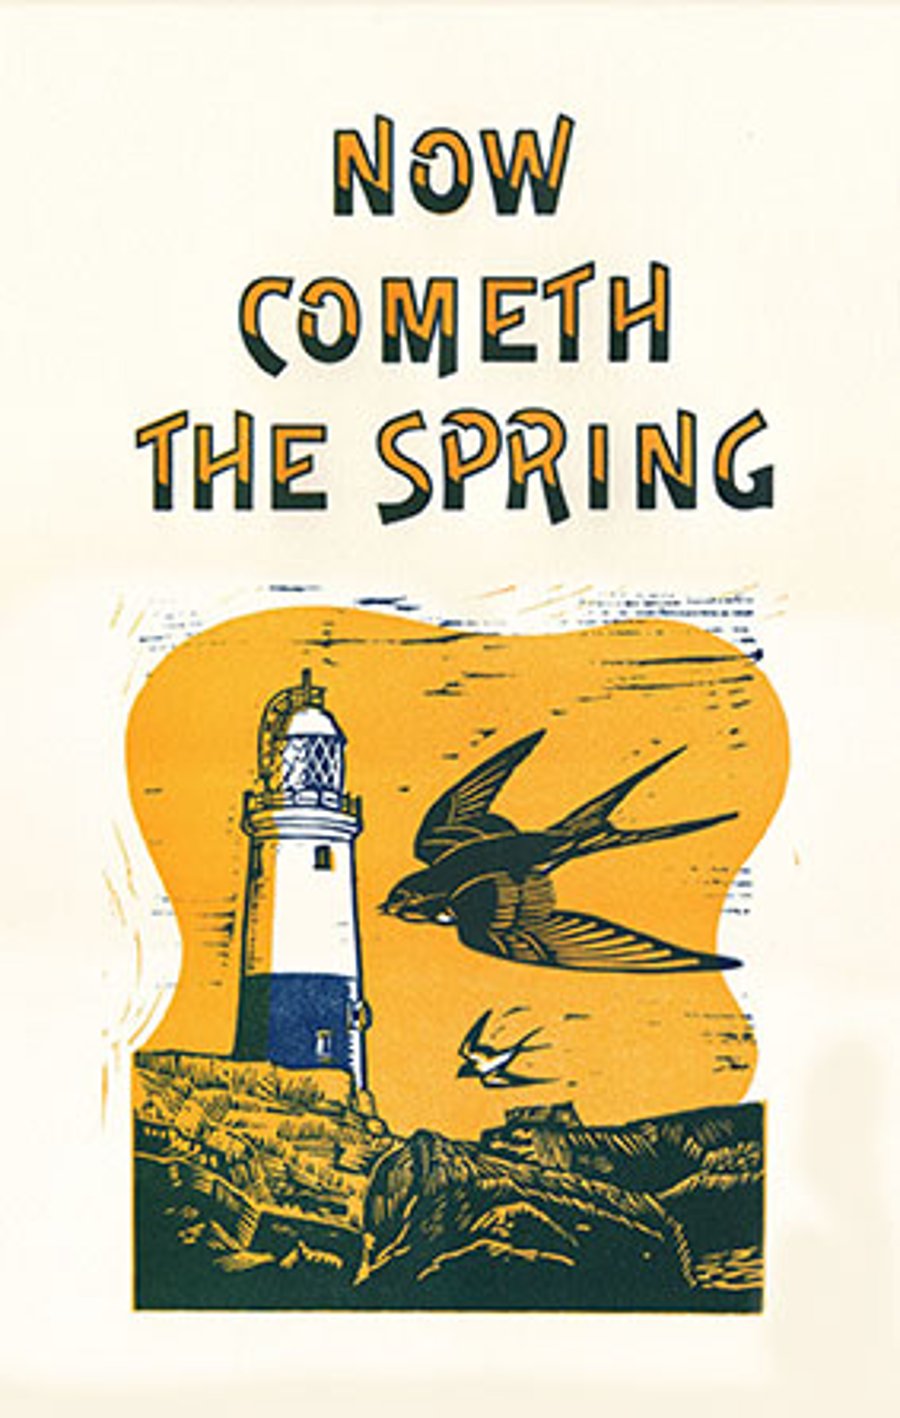 “Now Cometh The Spring” Letterpress and Lino-cut poster.